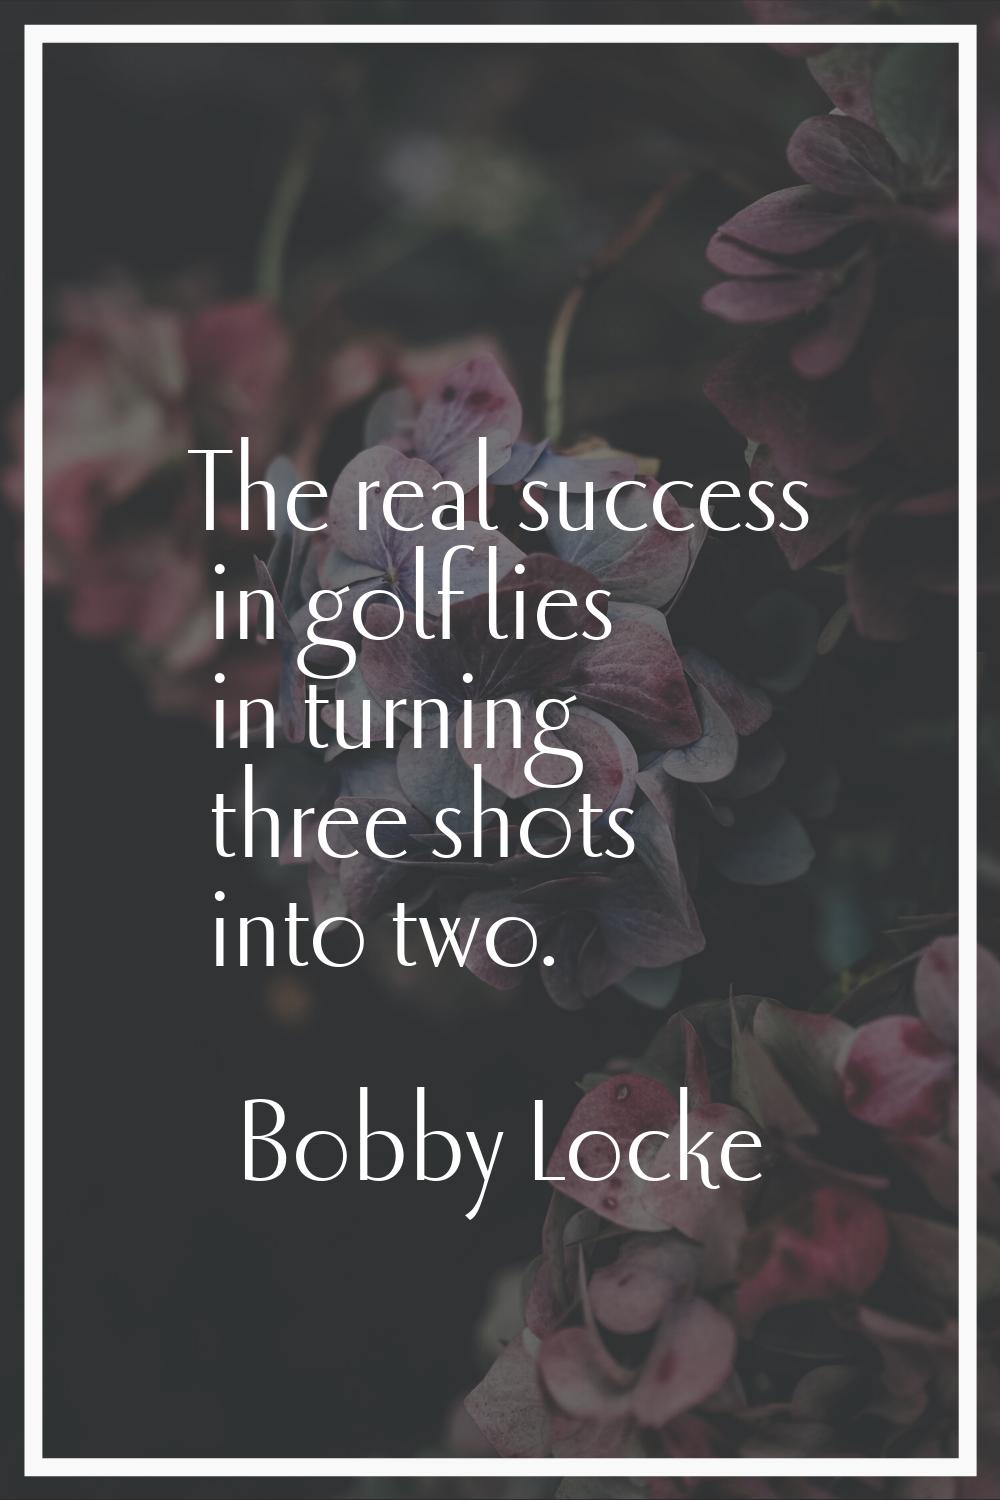 The real success in golf lies in turning three shots into two.